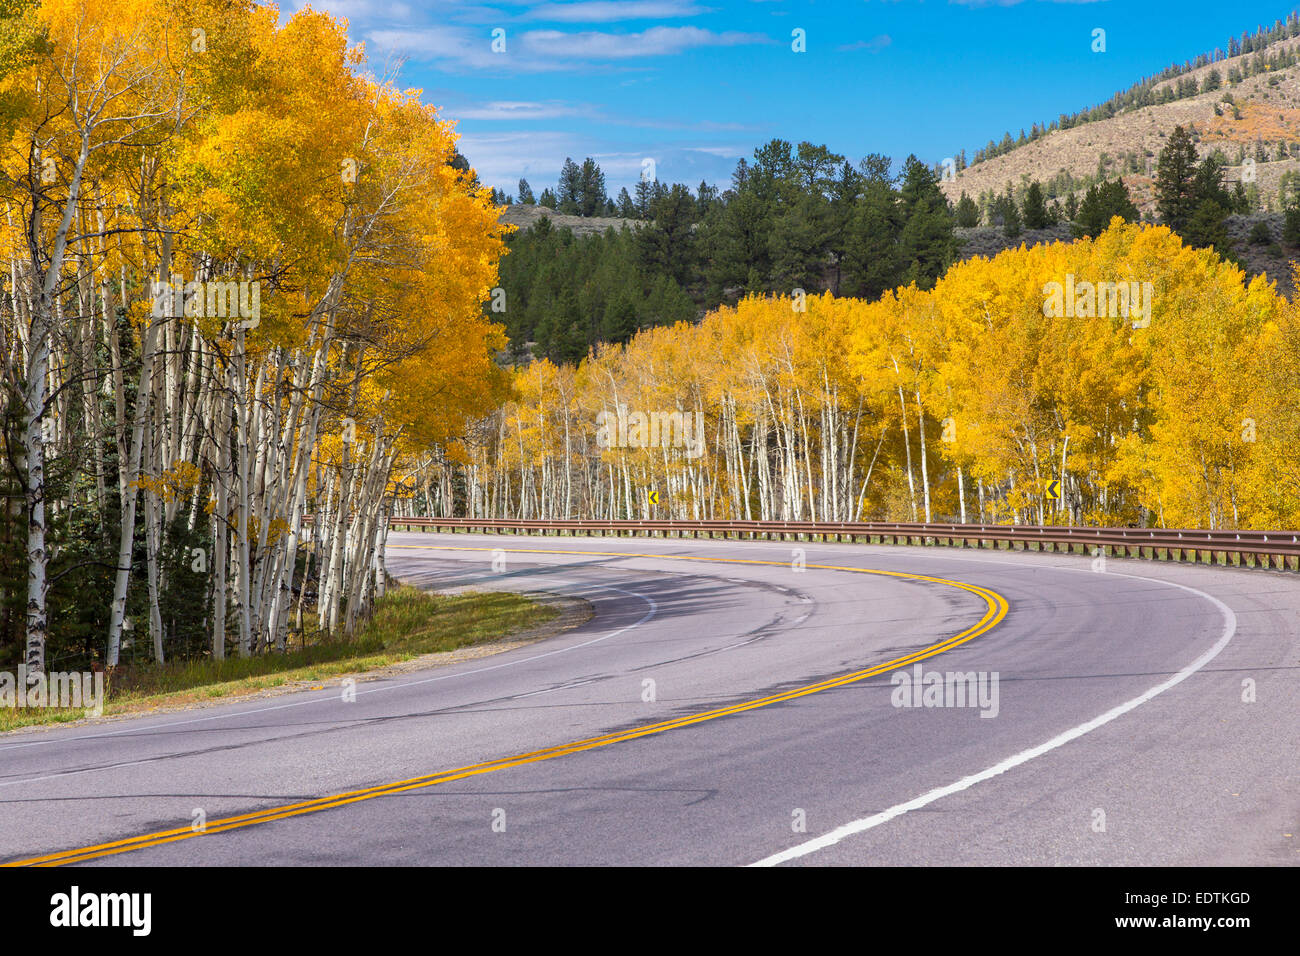 Curving road though bright yellow fall Aspen trees in the Rocky Mountains of Colorado Stock Photo